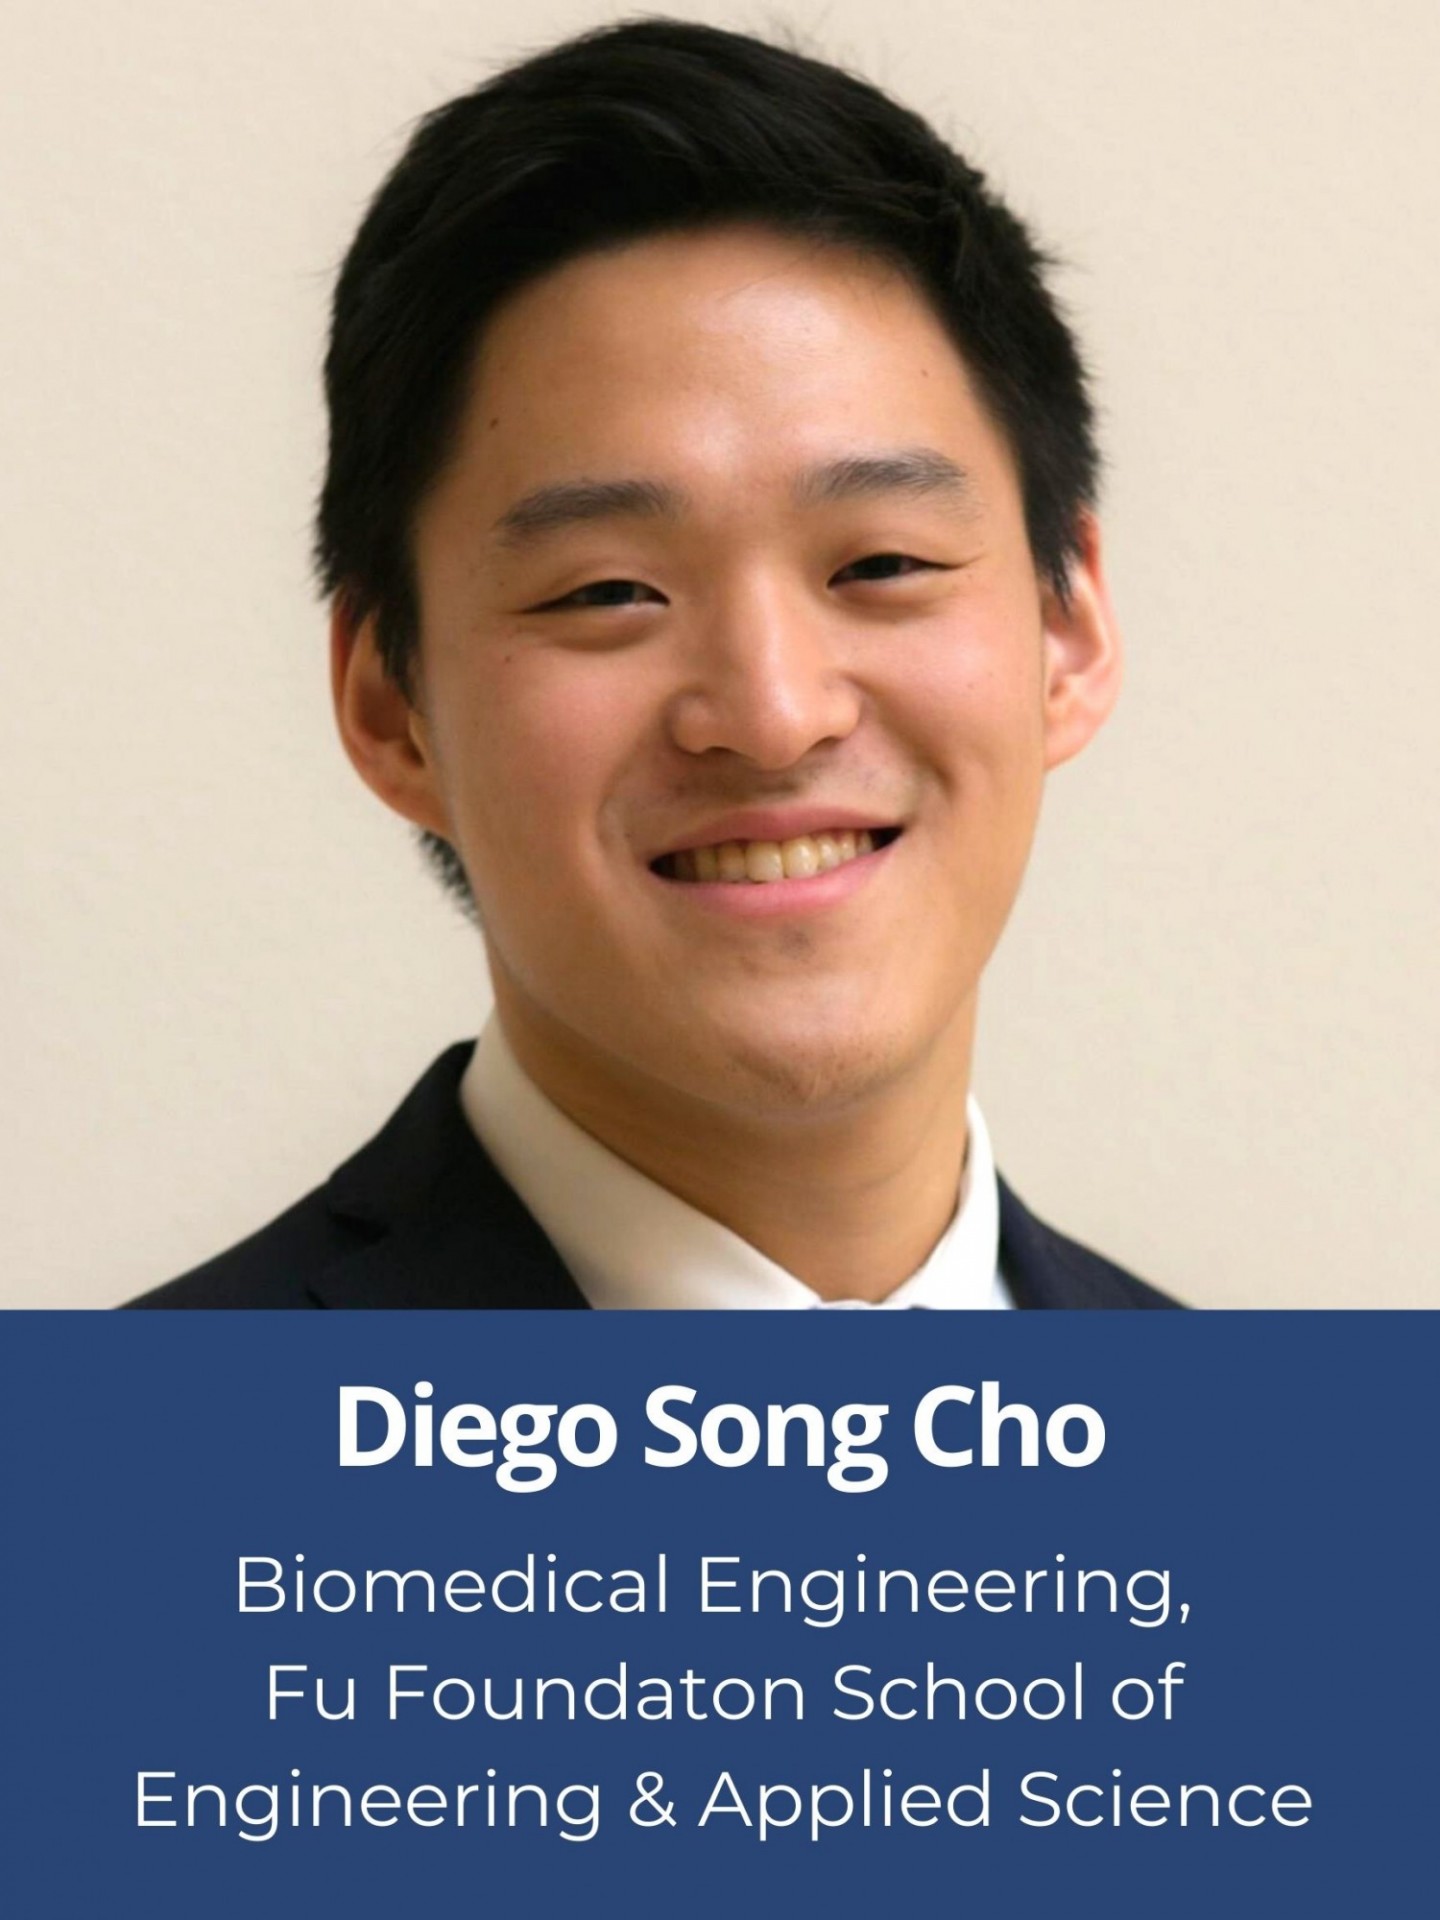 Diego Song Cho